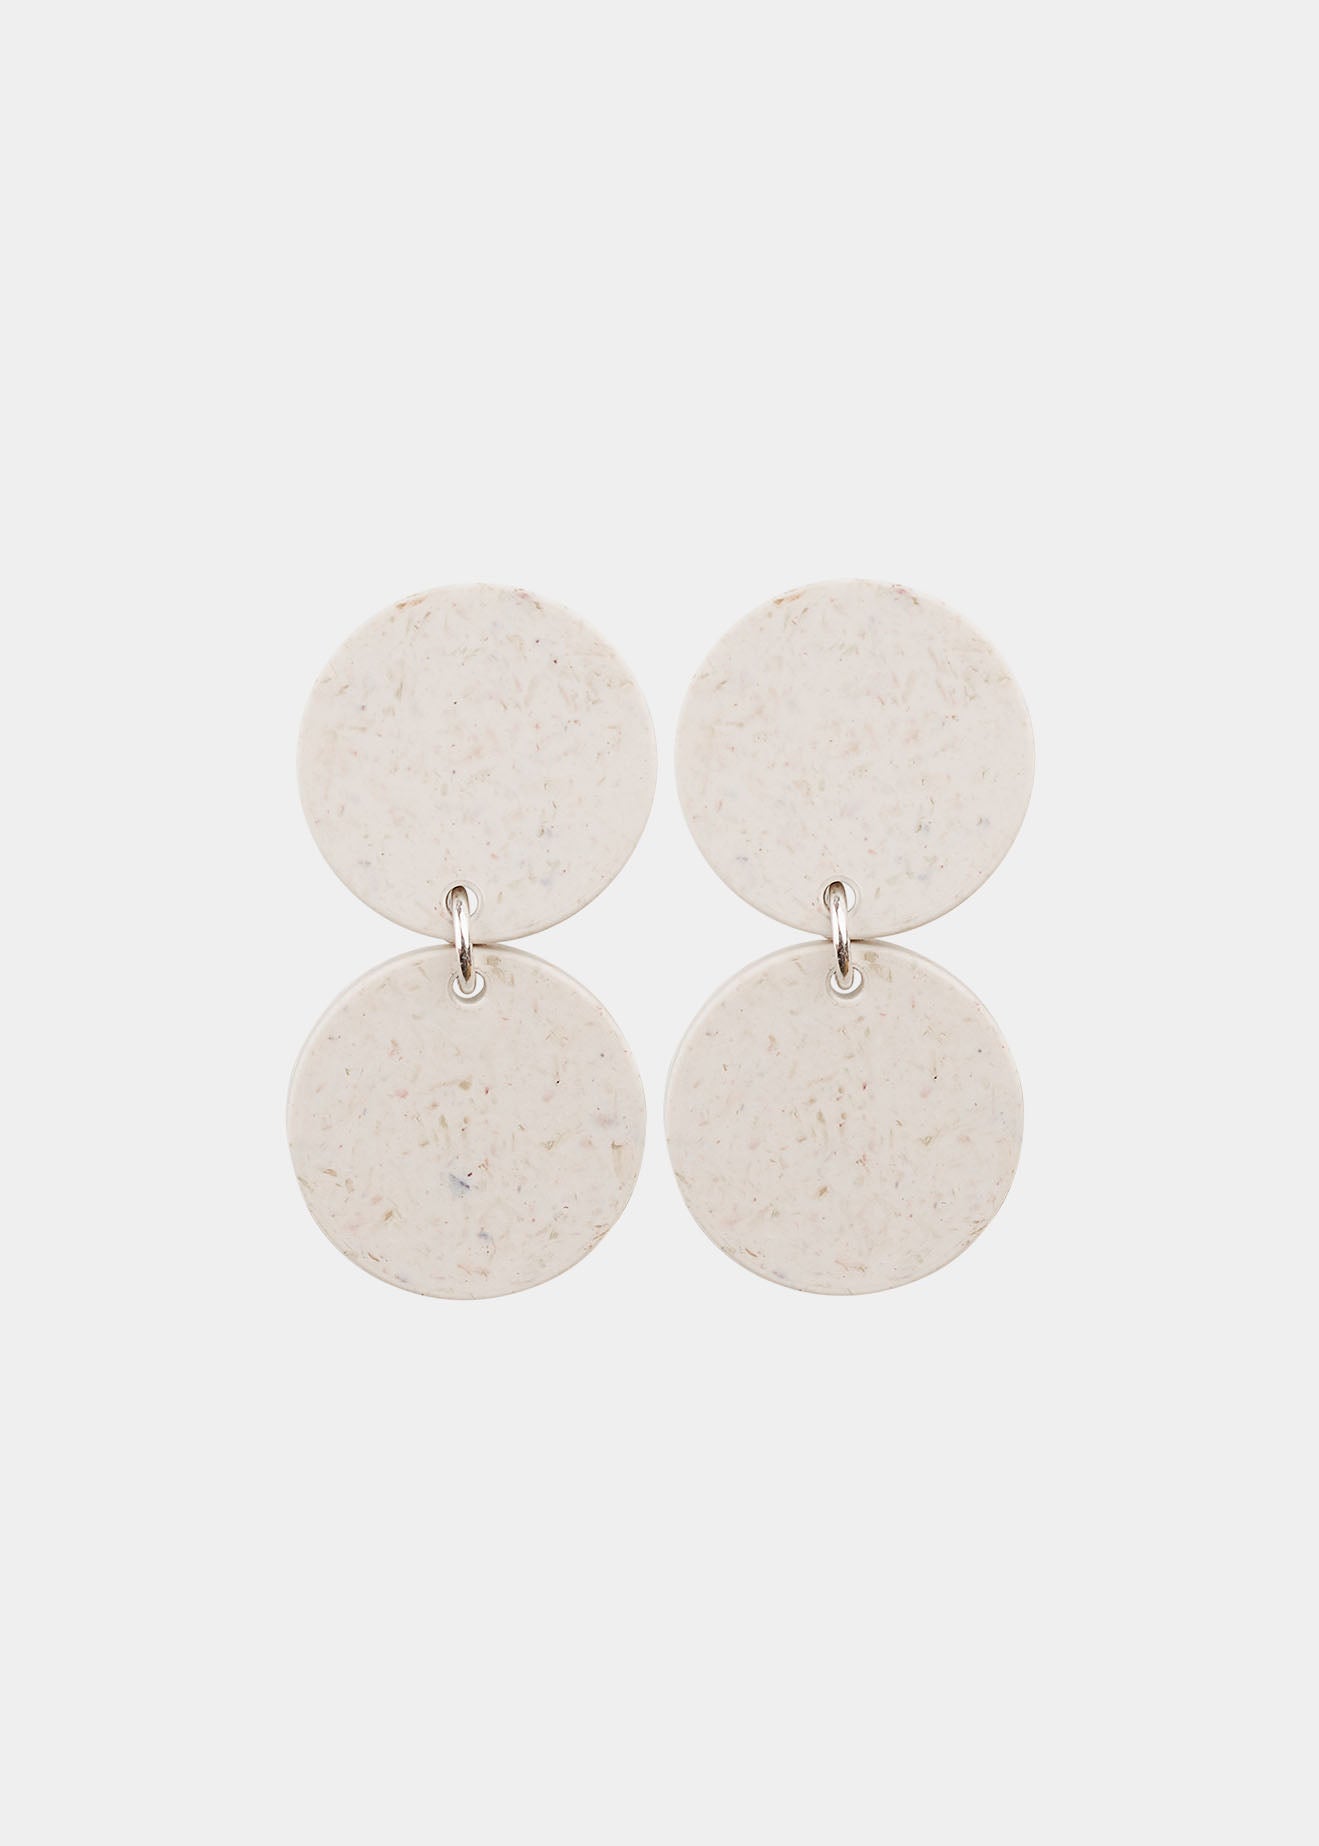 DOTS EARRINGS No.2, First Snow